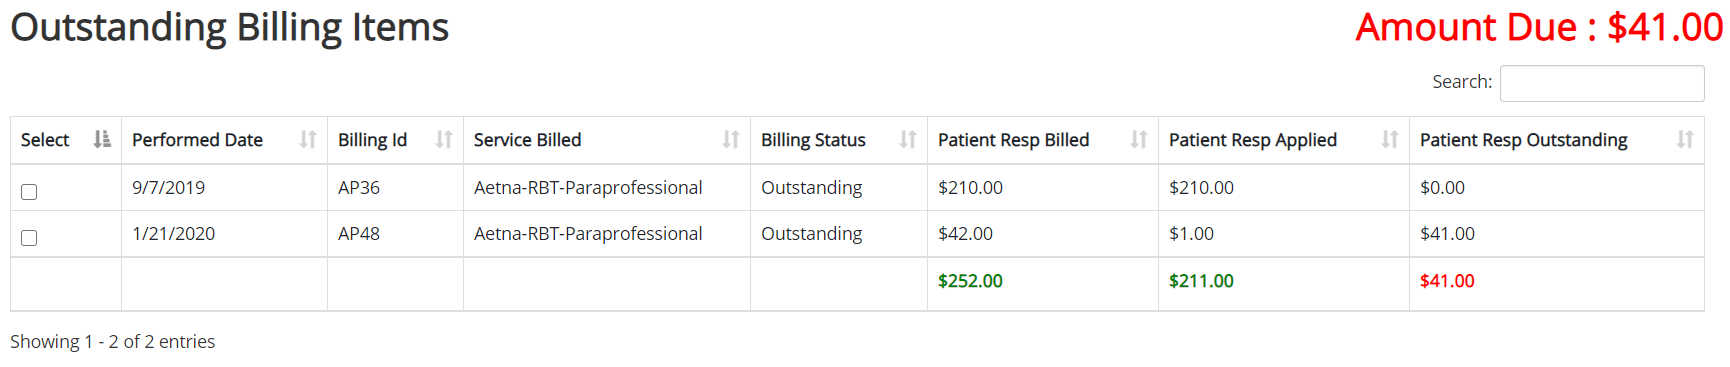 Outstanding_Billing_Items.png